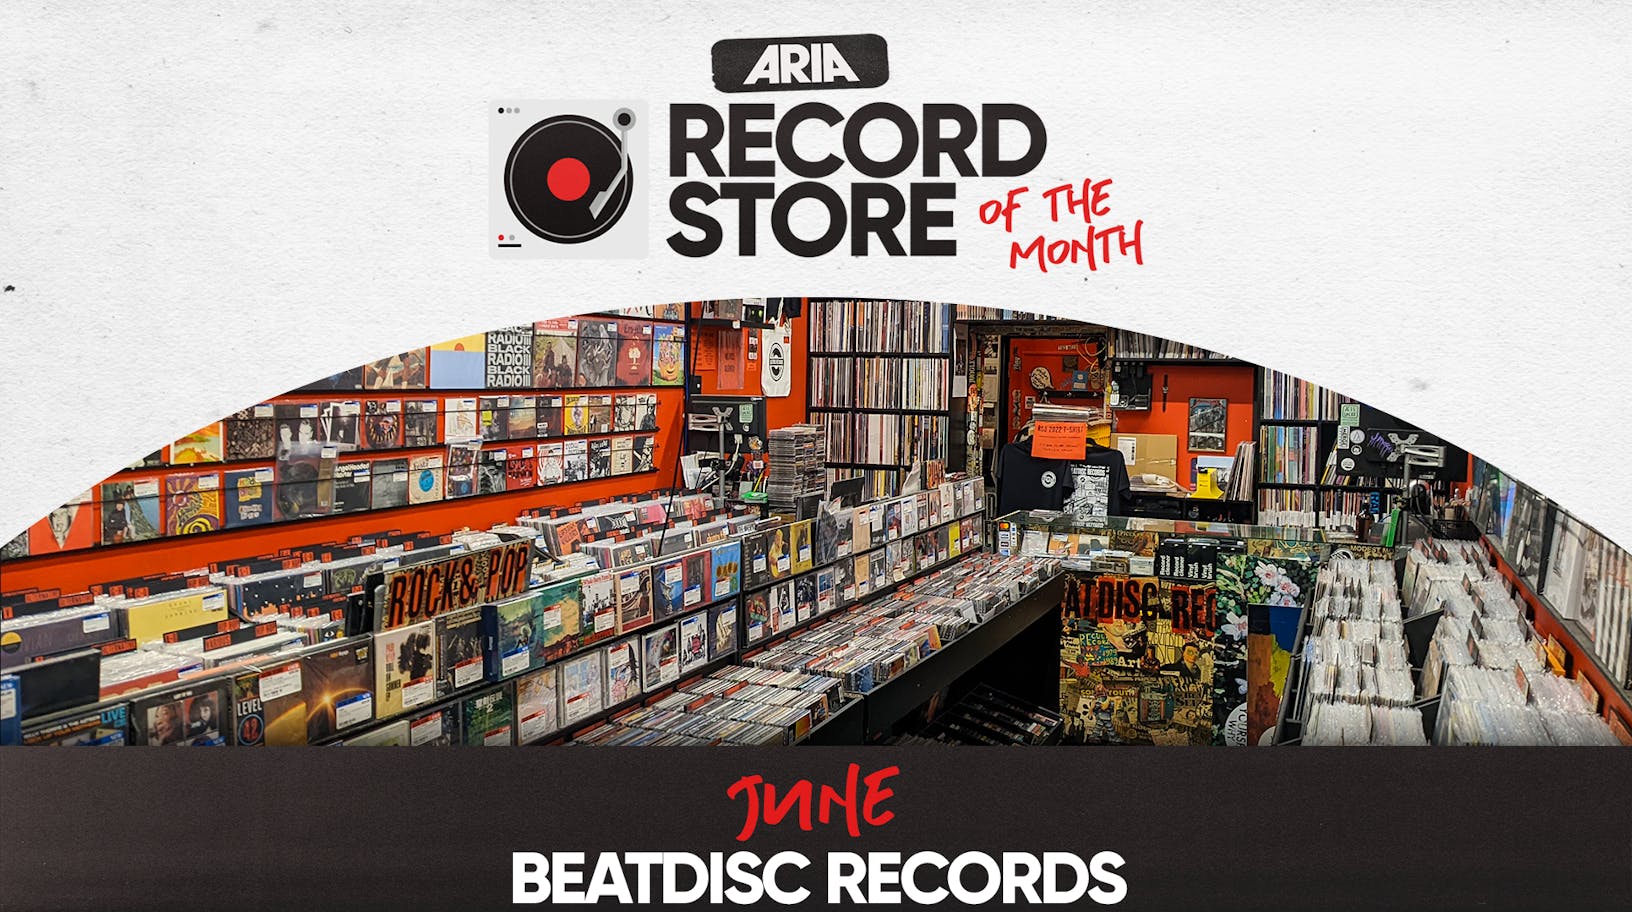 ARIA Of The Month: Records